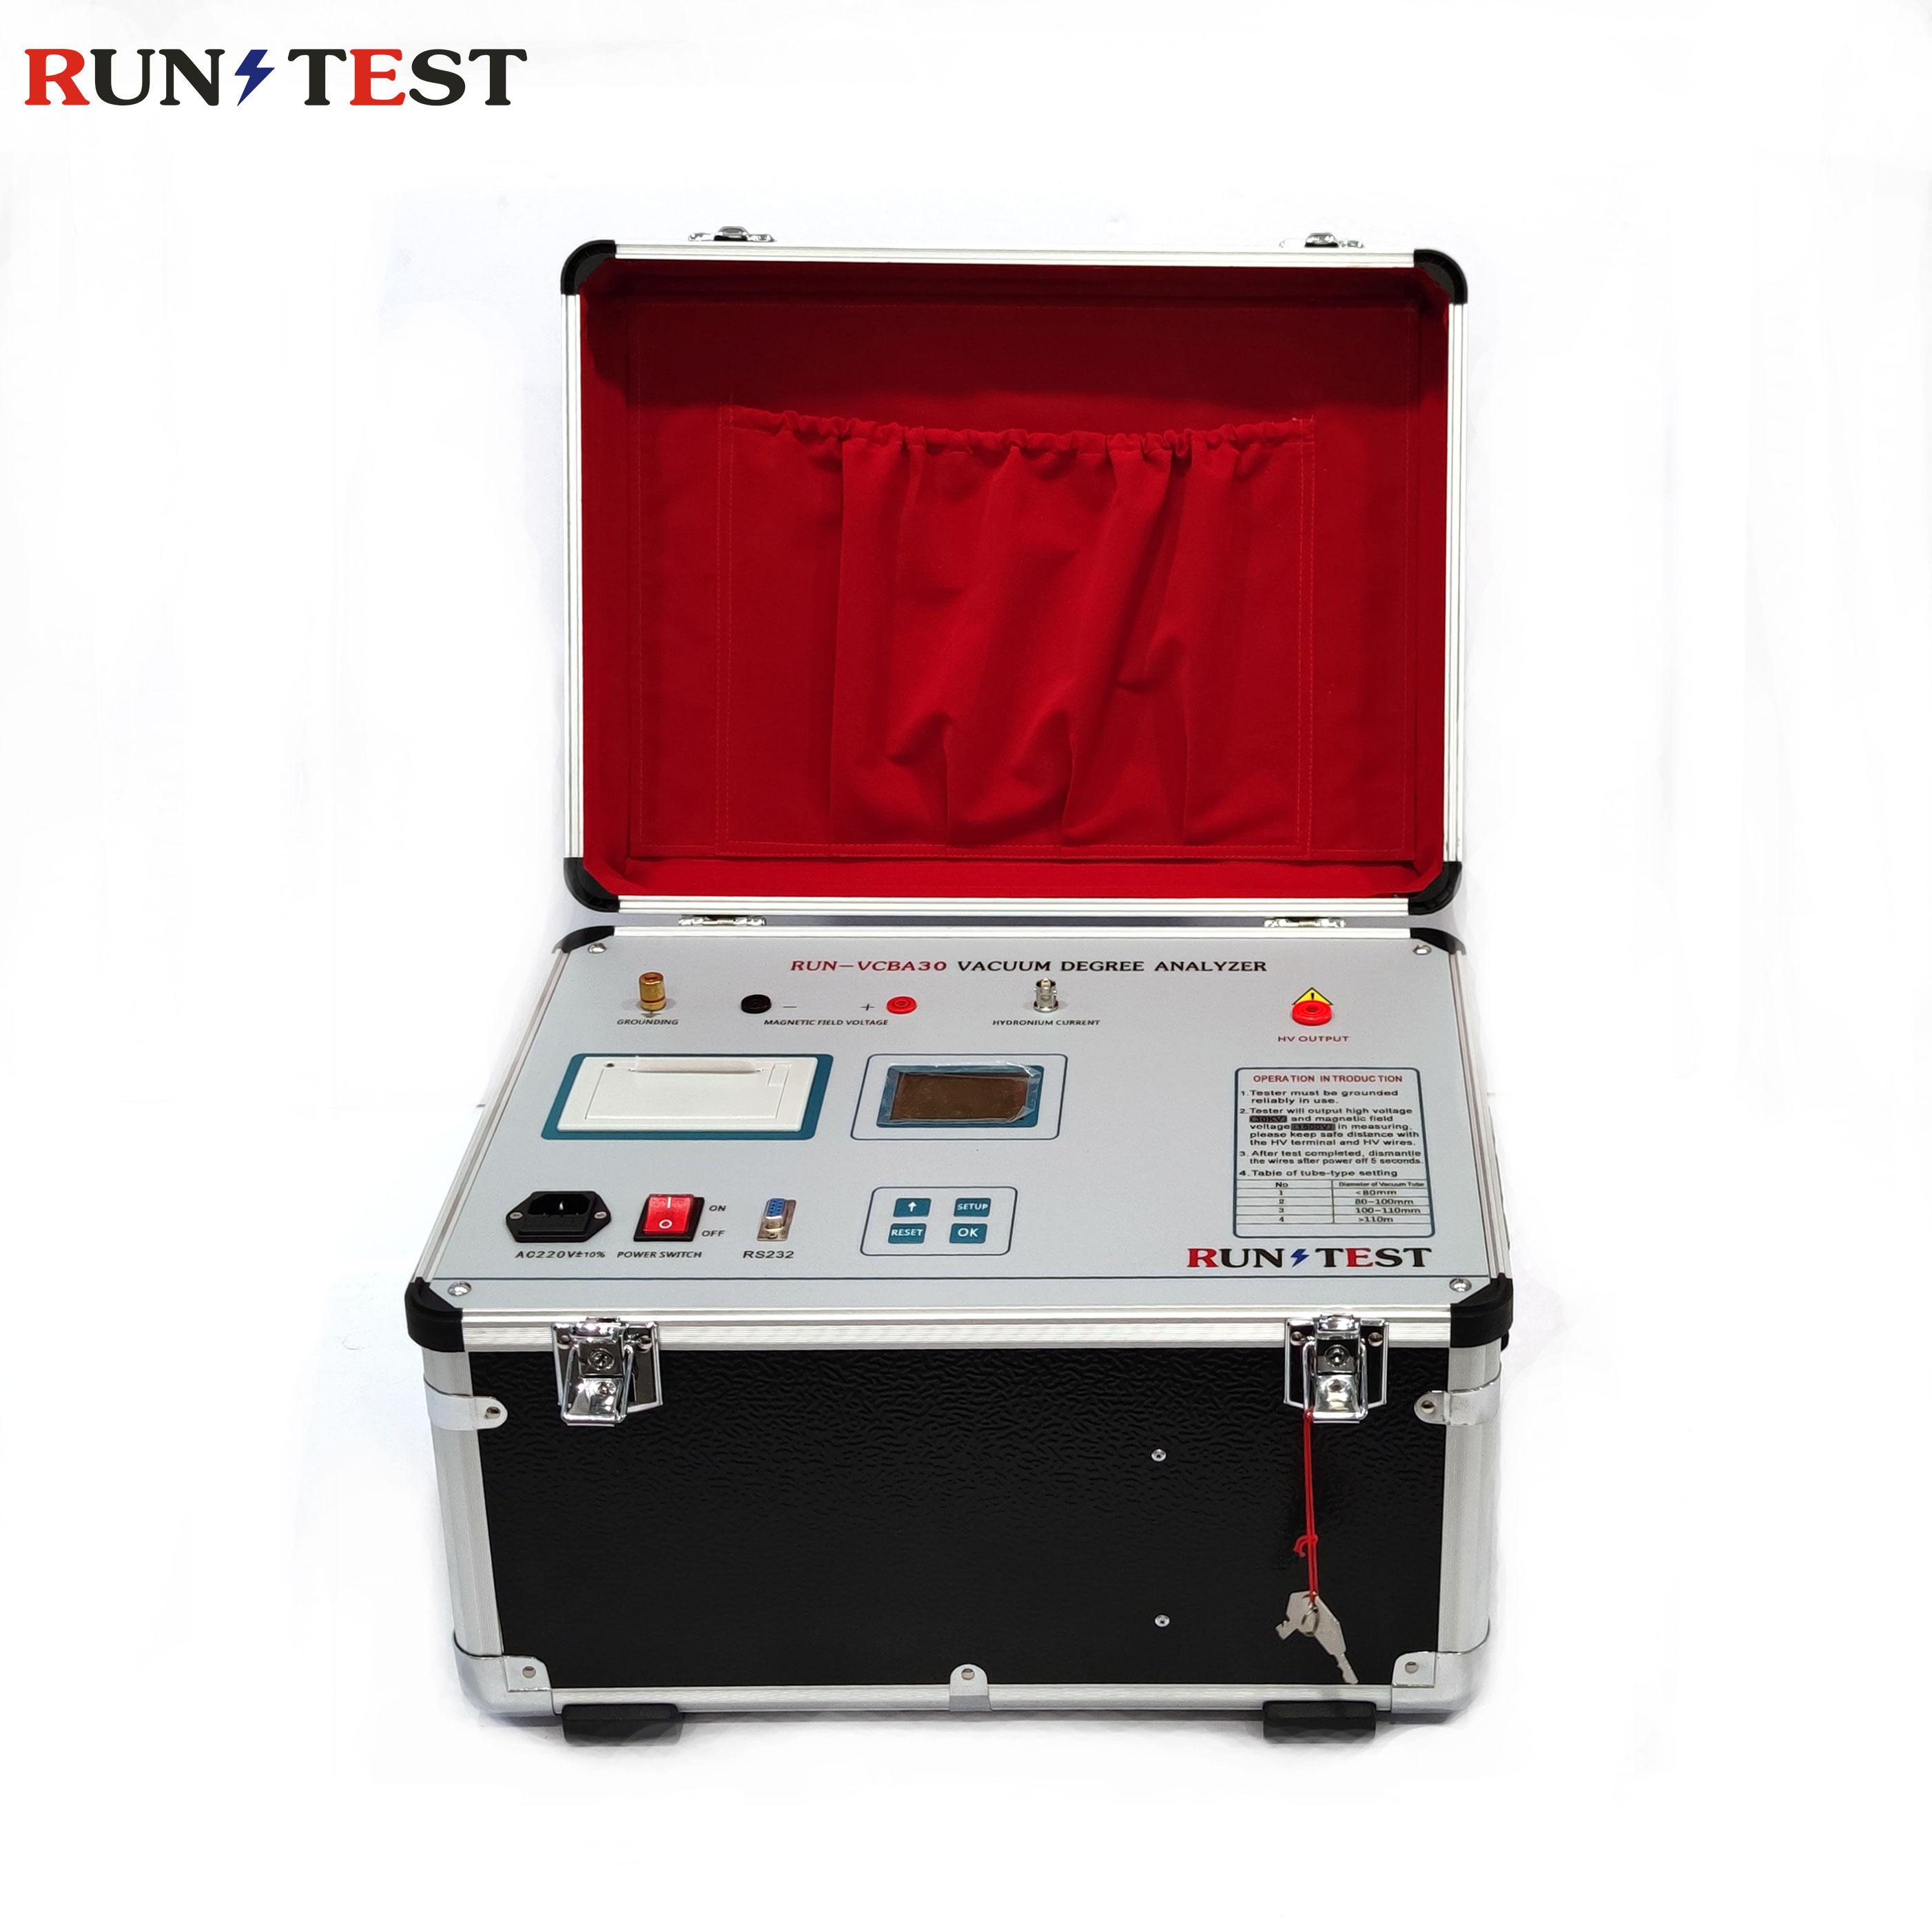 Switch Vacuity Test Kit Vacuum Interrupter Tester Vcb Vacuum Degree Test Equipment Featured Image